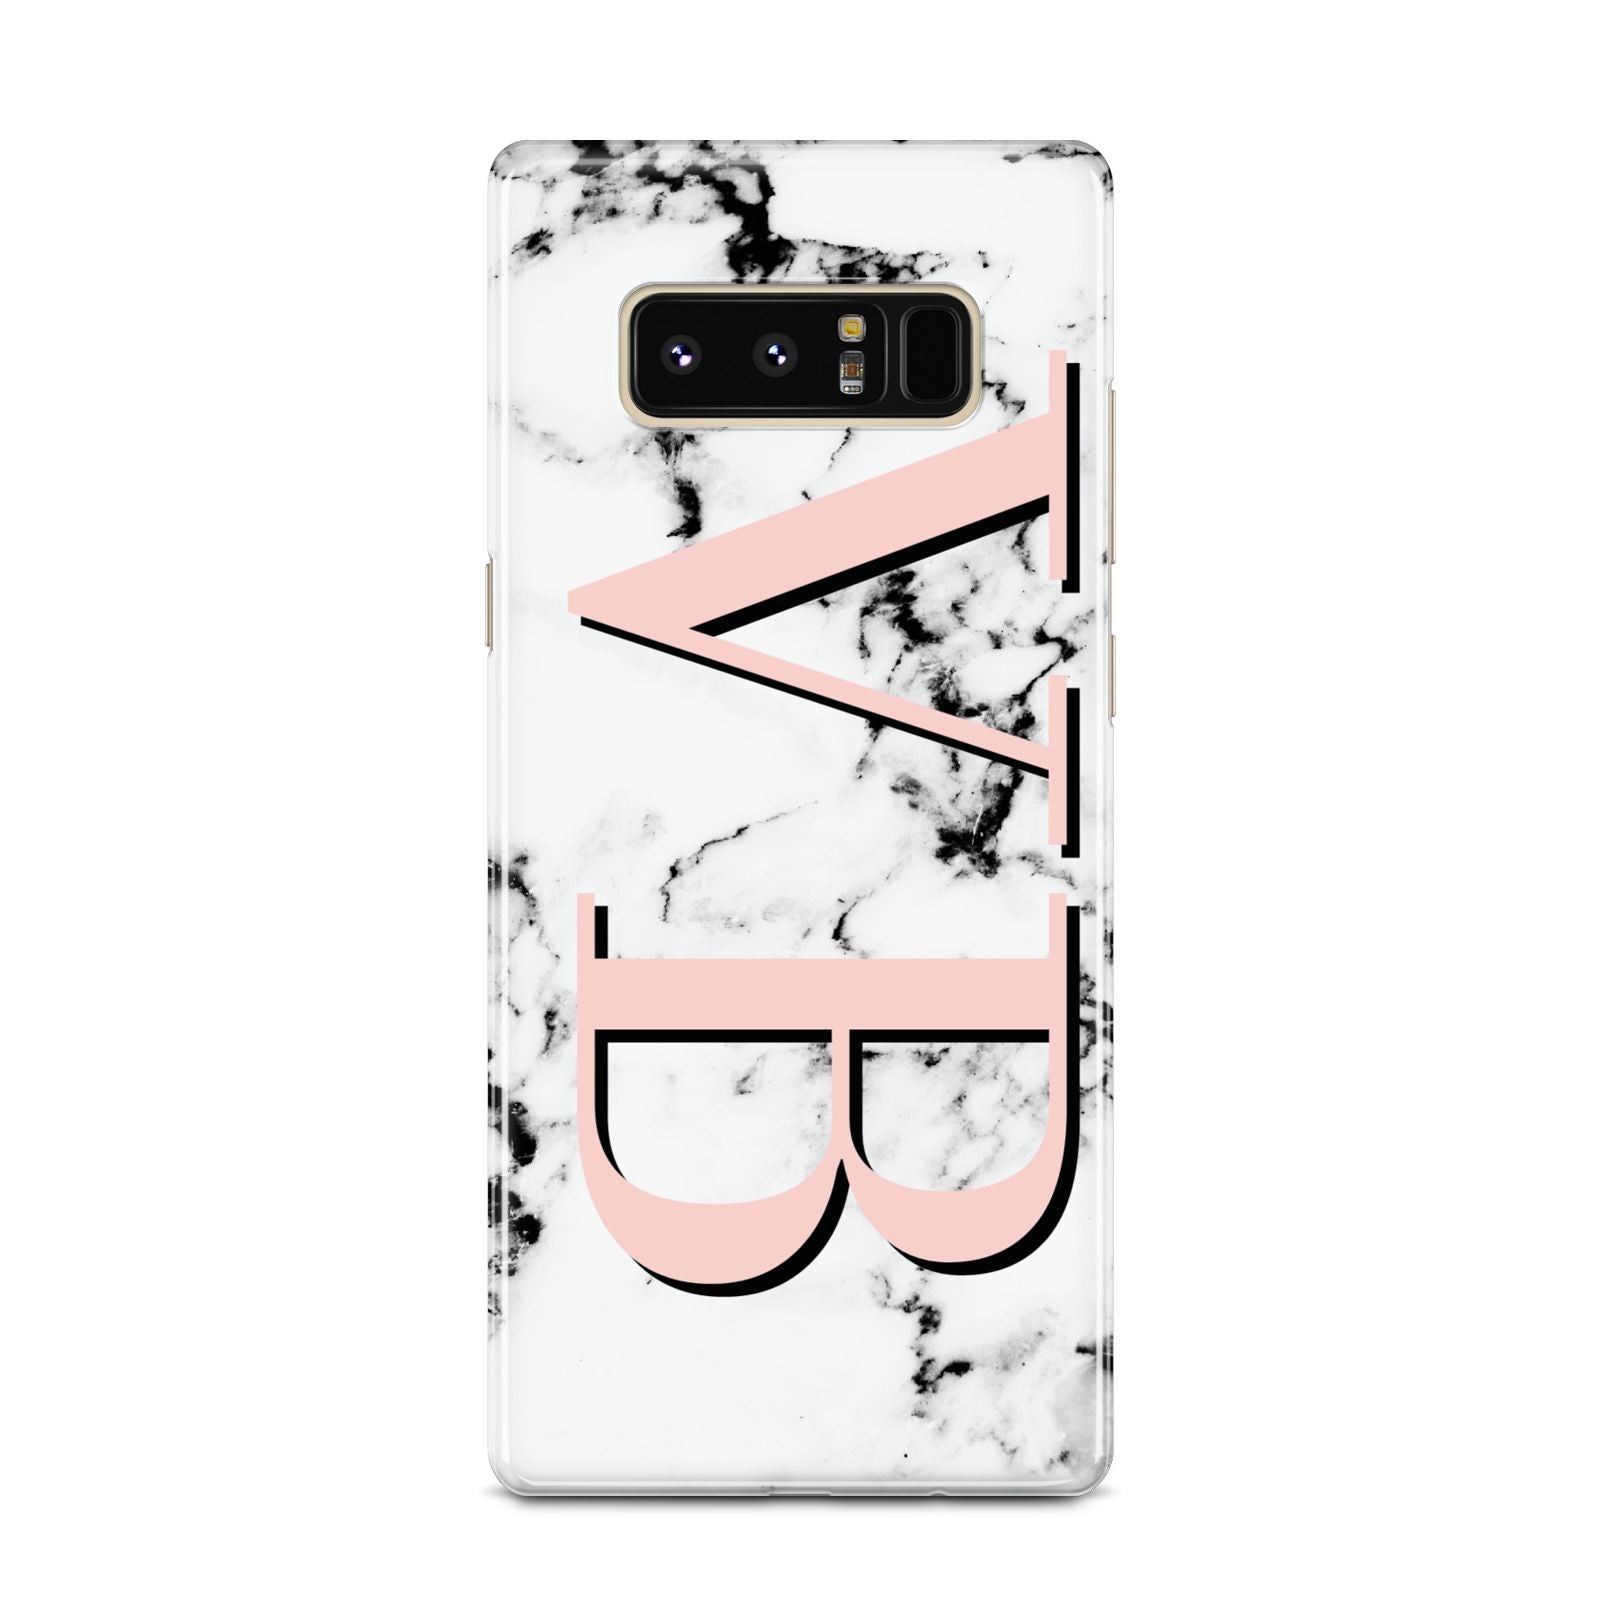 Personalised Coral Malble Initials Samsung Galaxy Note 8 Case